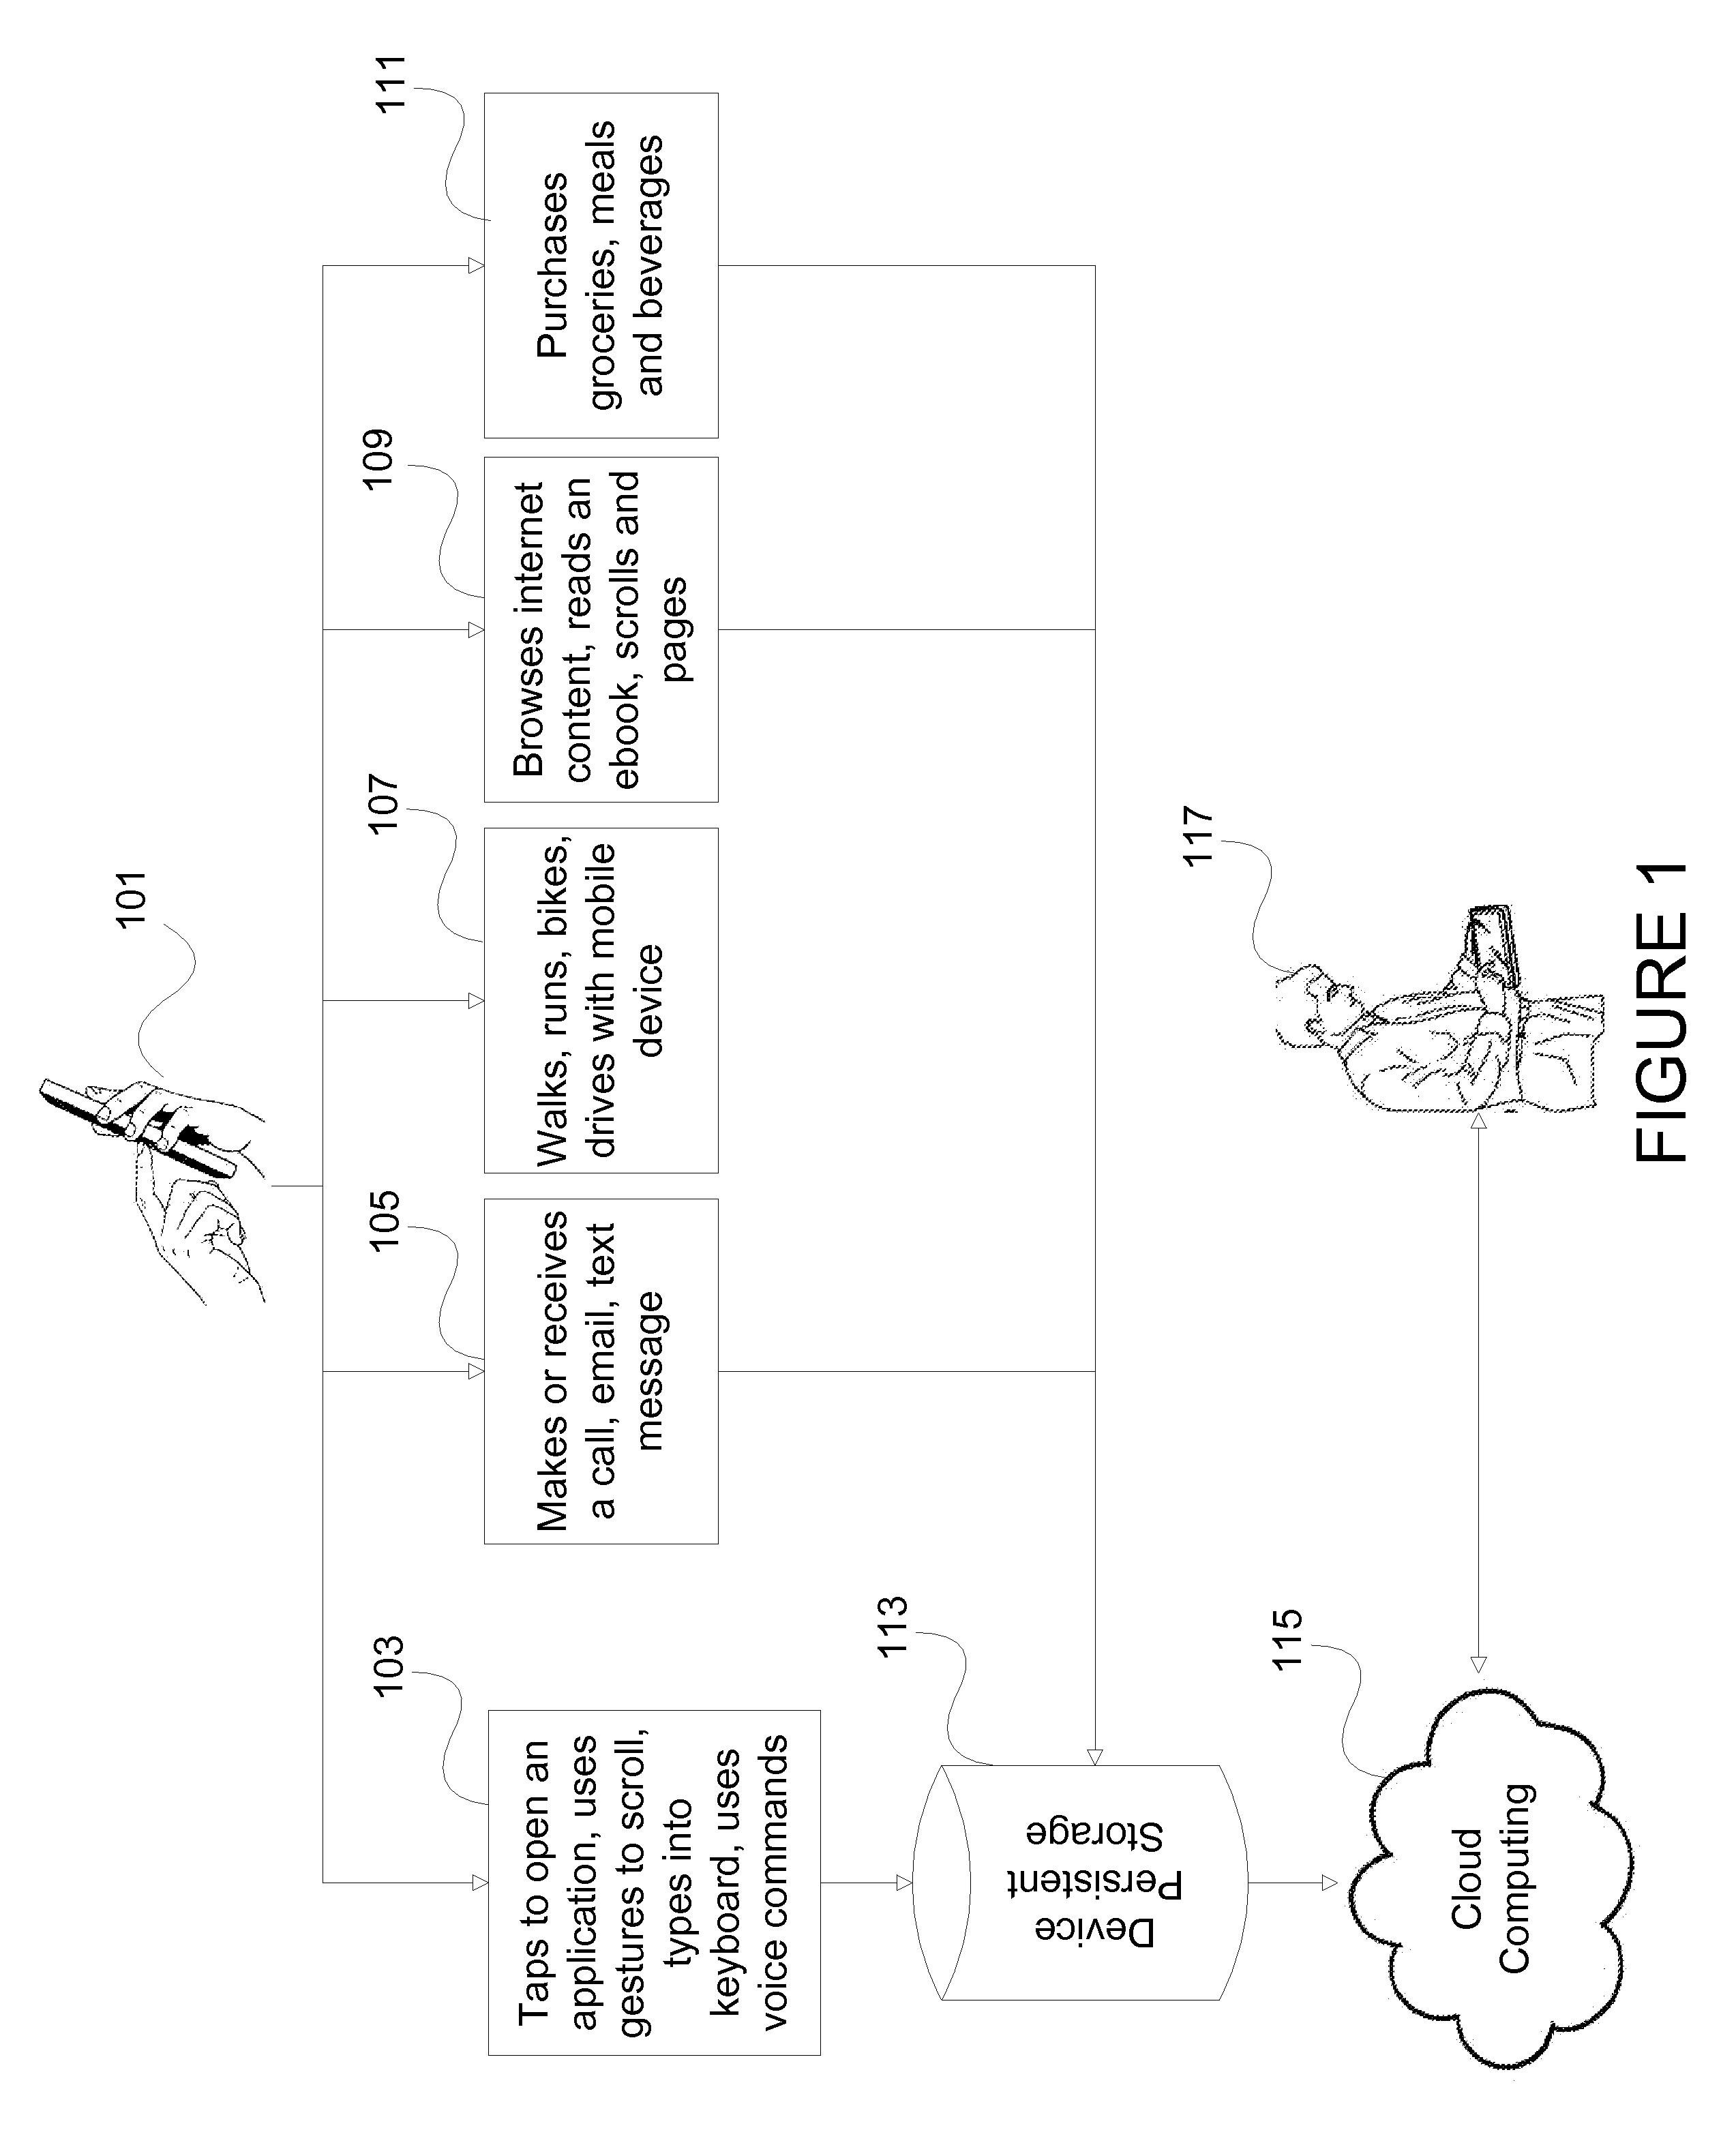 Method and system for assessment of cognitive function based on mobile device usage